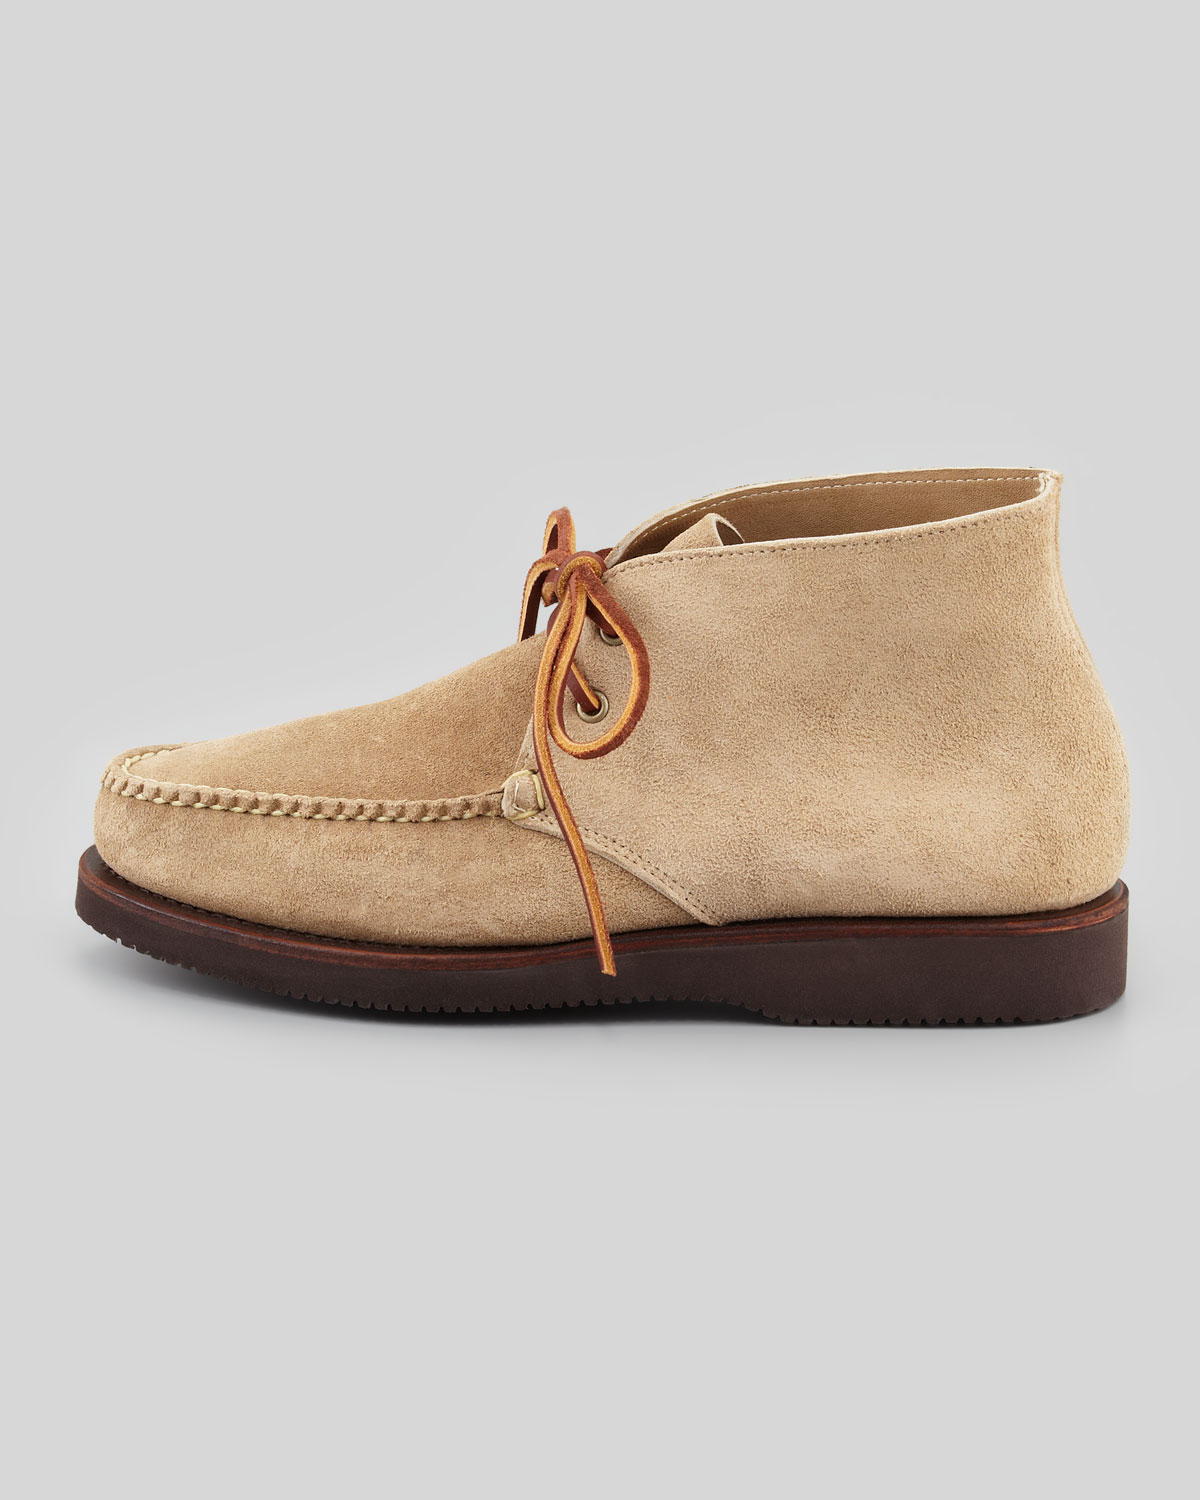 Eastland Jefferson Usa Chukka Boot in Natural for Men - Lyst